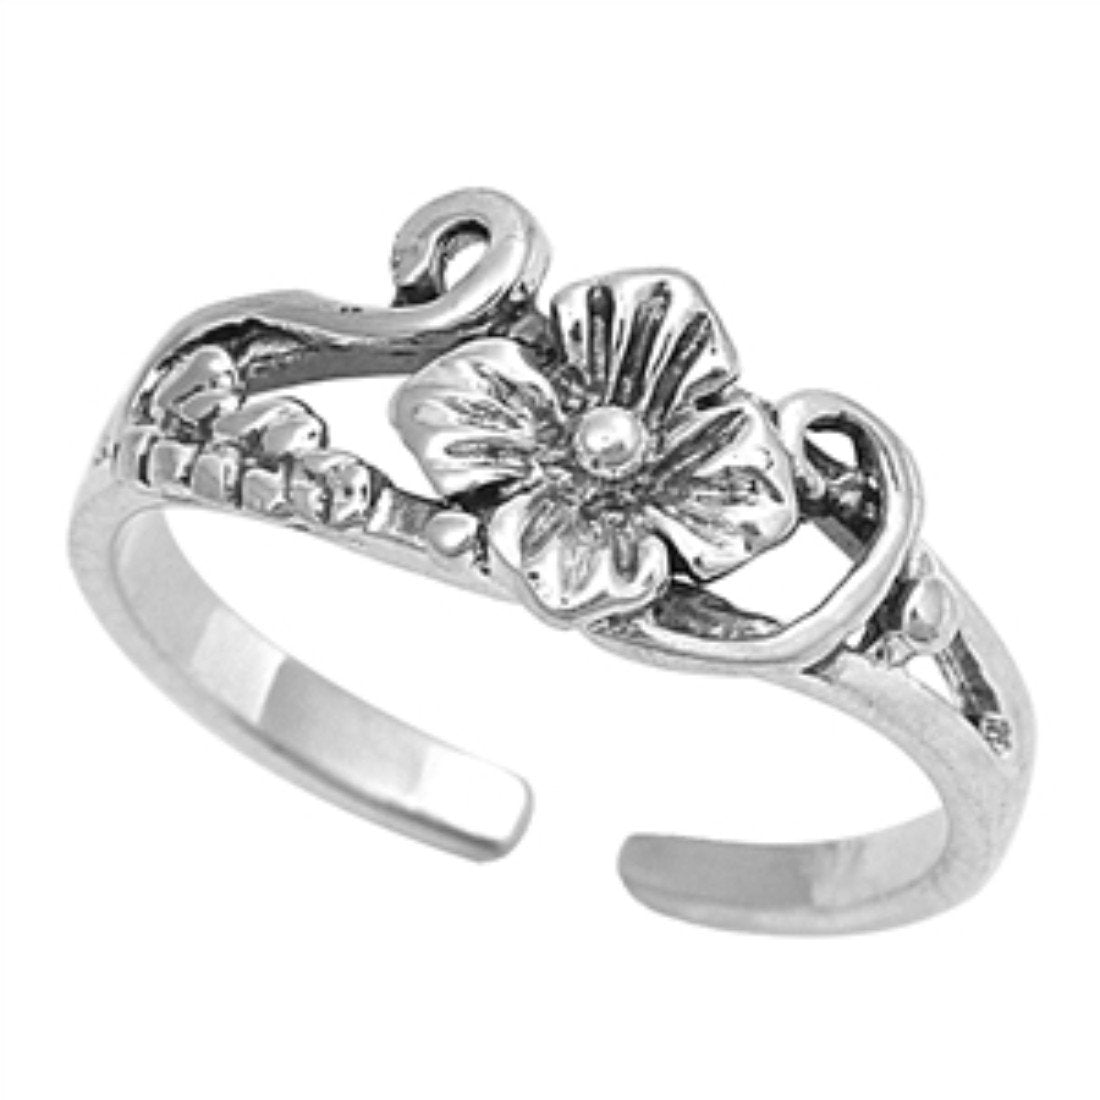 Flower Toe Ring Adjustable Band 925 Sterling Silver For Women (6mm)